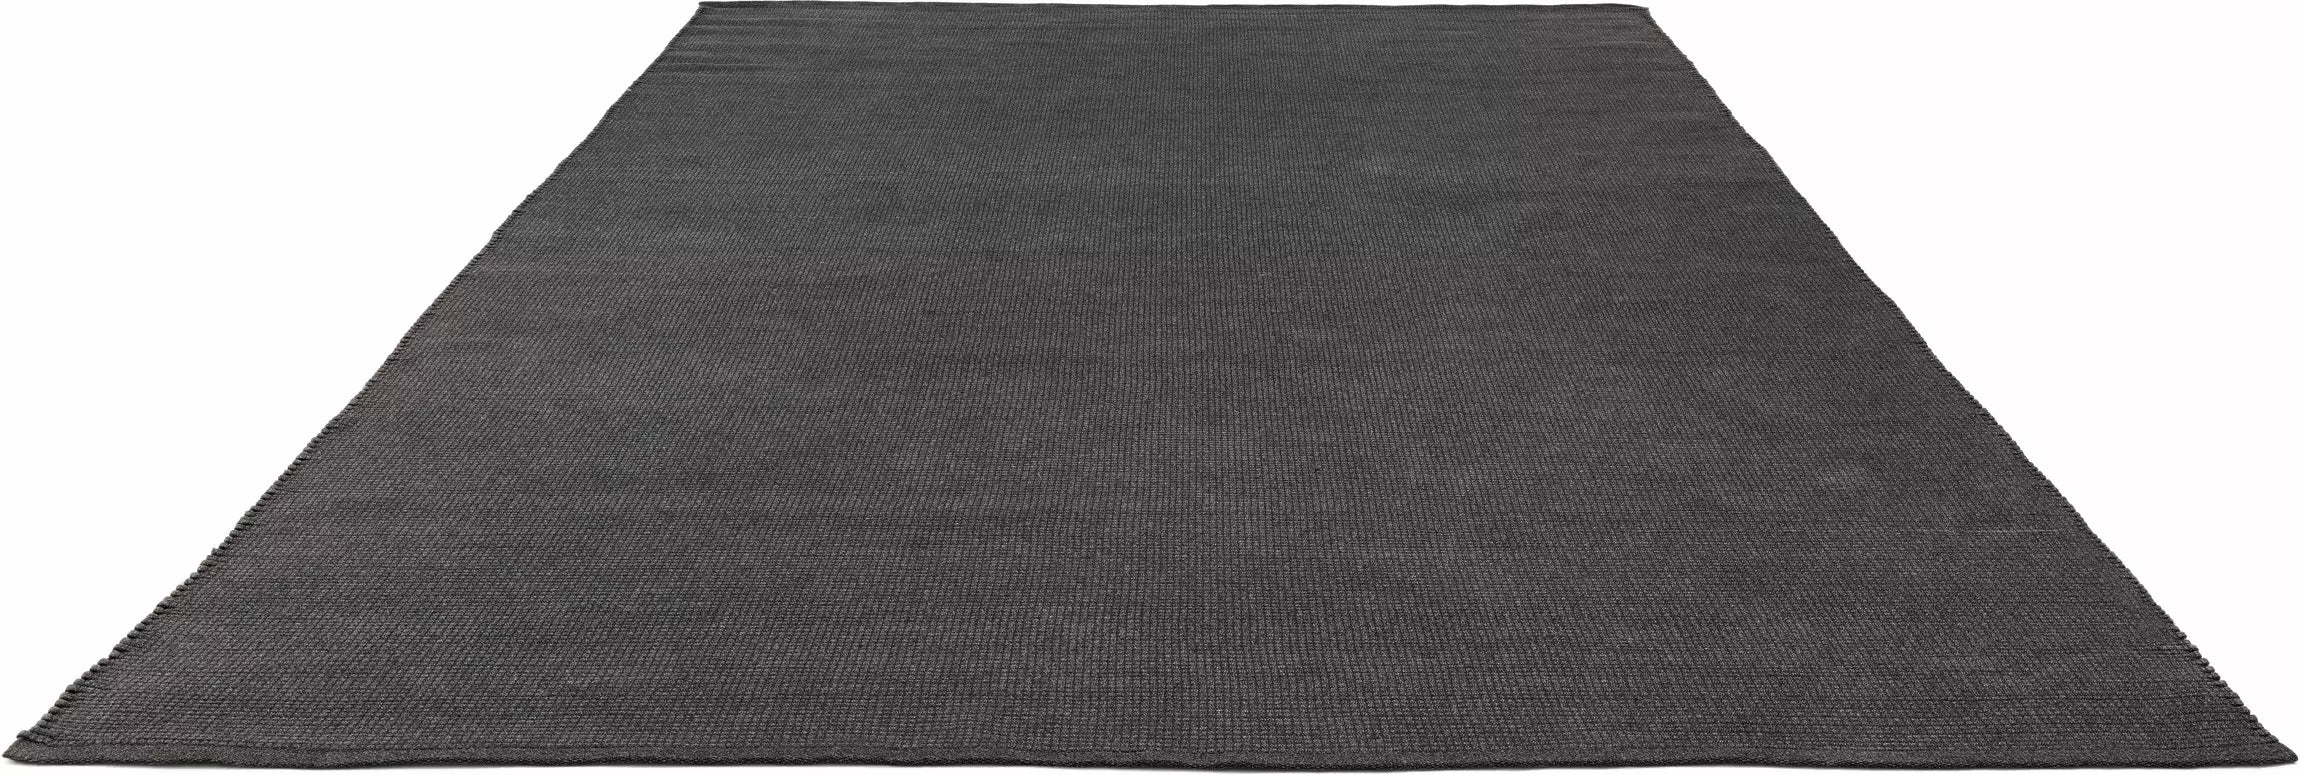 Manutti Linear Rugs 250x350 anthracite